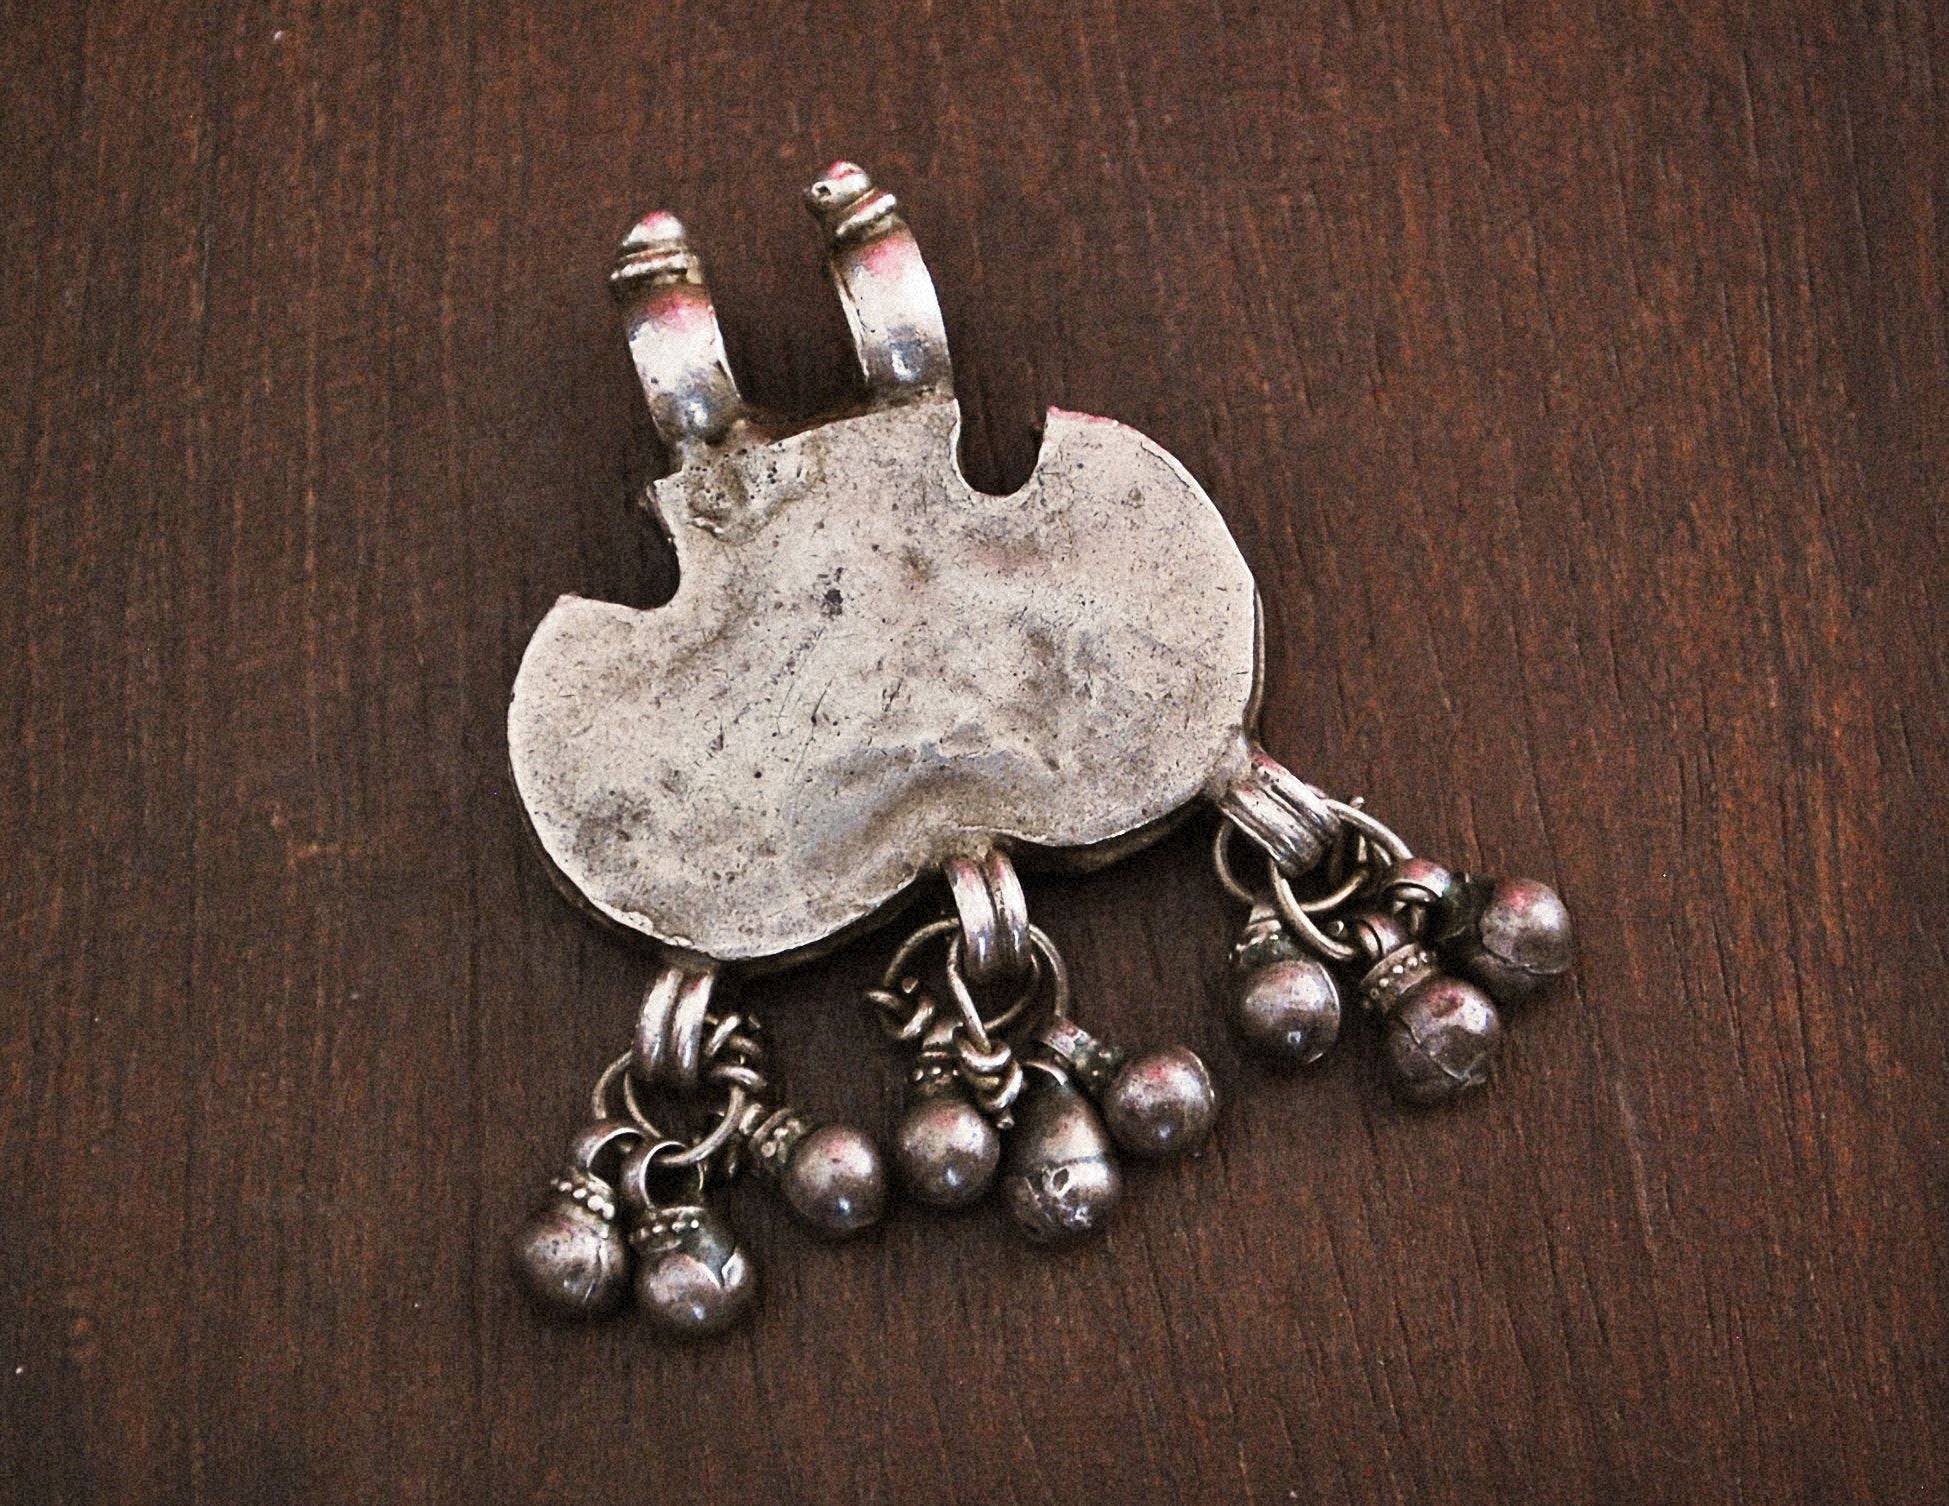 Rajasthani Silver Amulet with Bells - Tribal Indian Amulet - Tribal Rajasthan Pendant - Rajasthani Jewelry